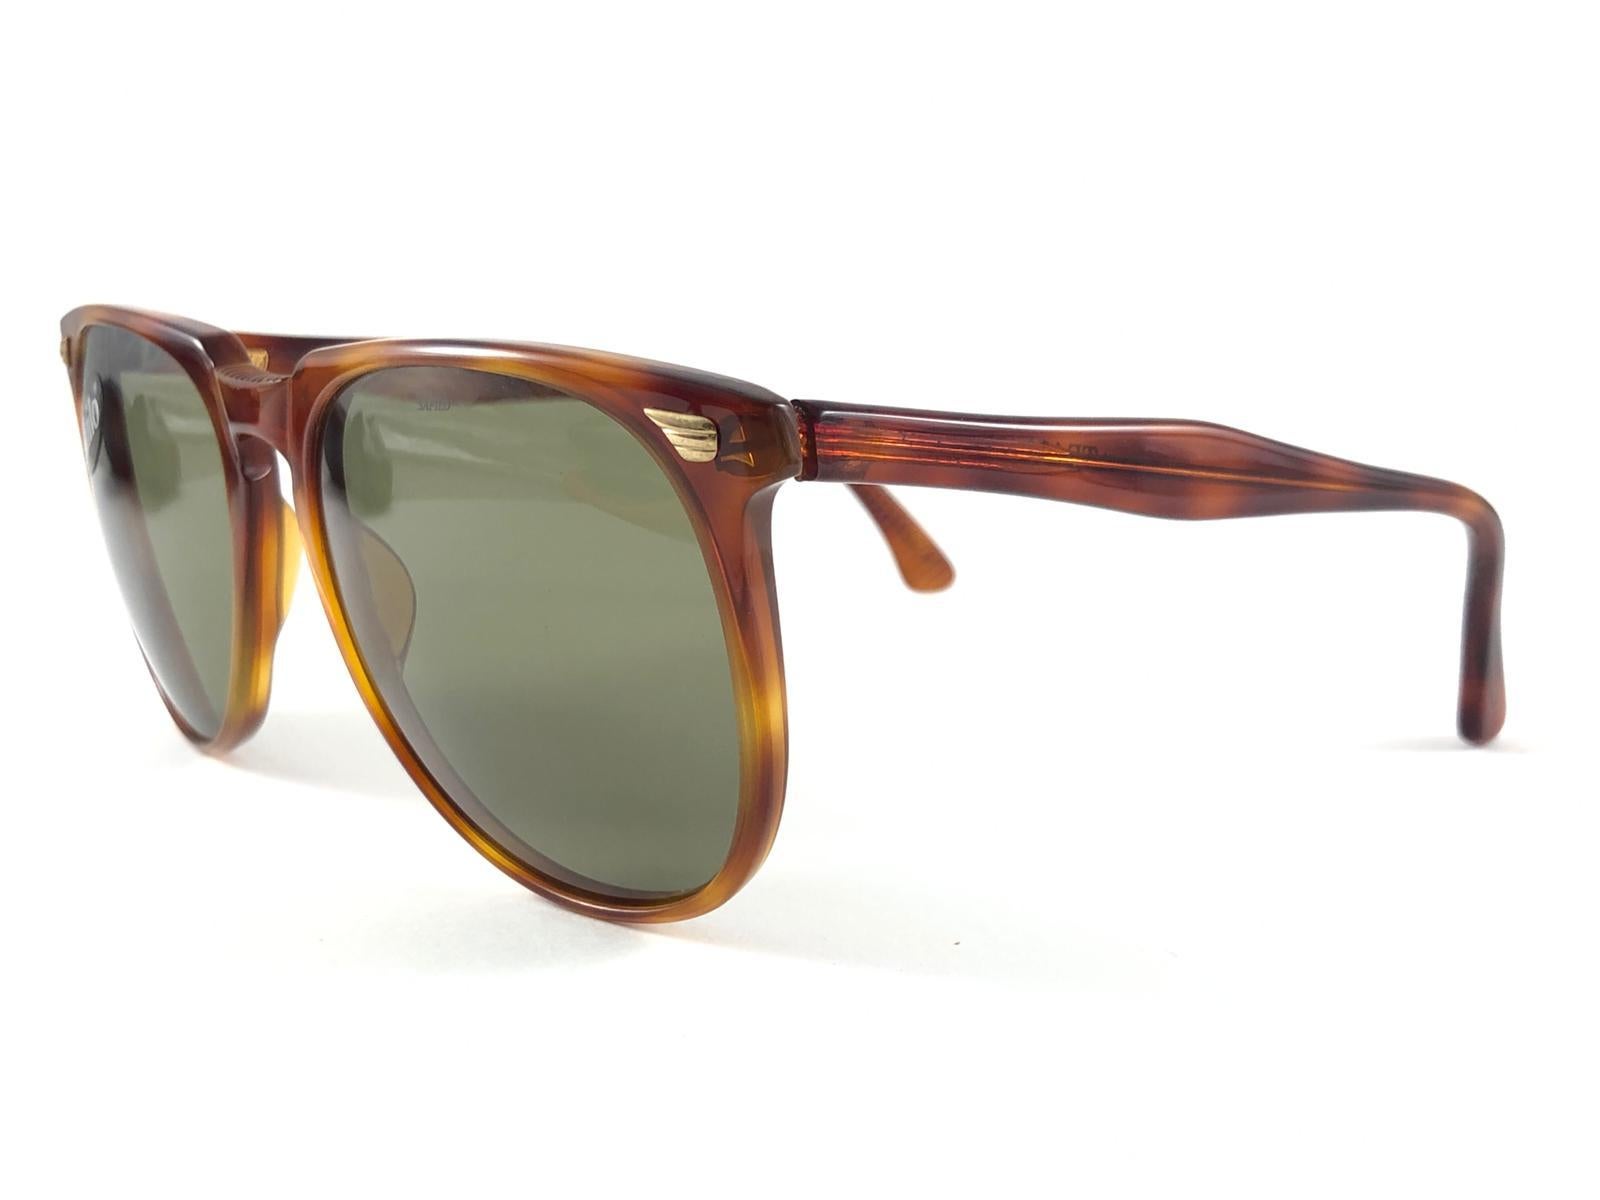 New Vintage Safilo, a balanced combination of Italian craftsmanship, design, functionality and striking aesthetics, this model showcases a Tortoise frame holding a medium Green lenses

New, never worn or displayed.
Made in